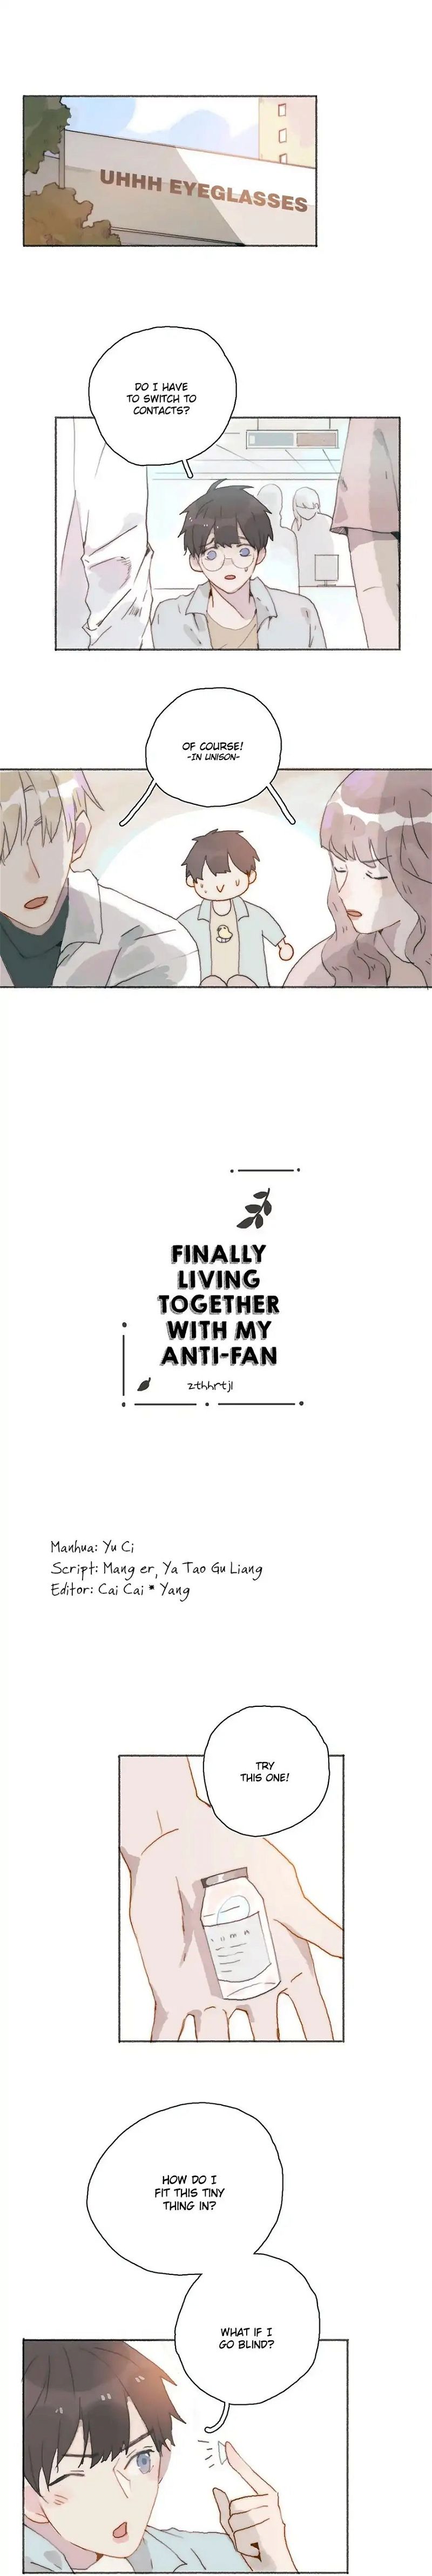 Finally Living Together With my Anti-Fan Chapter 39 page 1